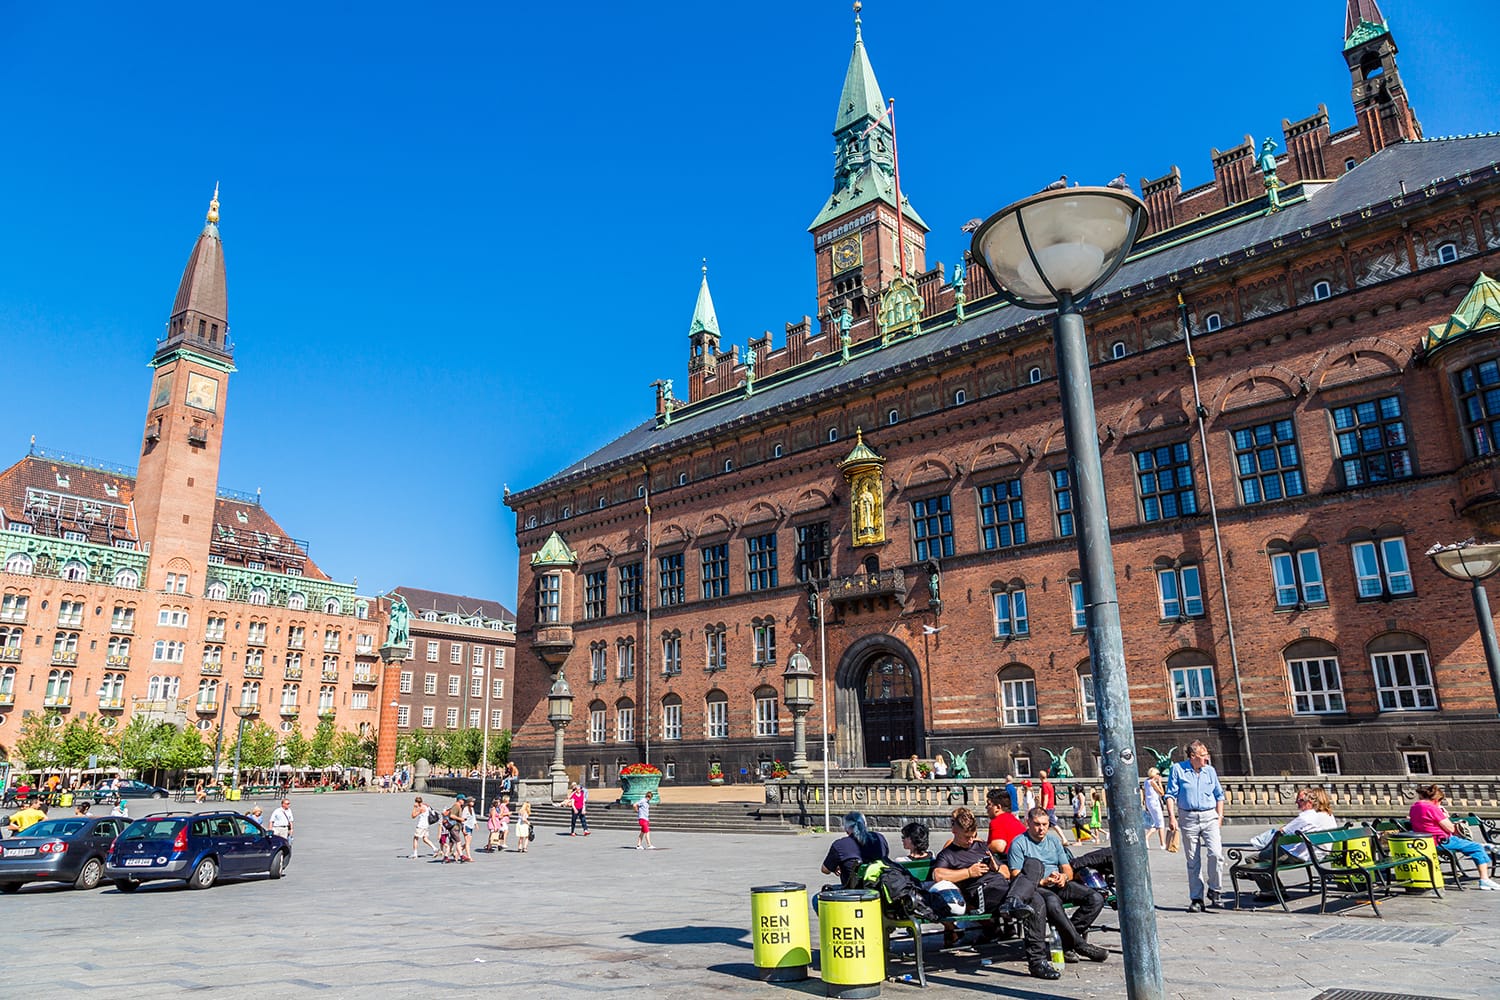 Copenhagen City Hall is the headquarters of the municipal council as well as the Lord mayor of the Copenhagen, Denmark